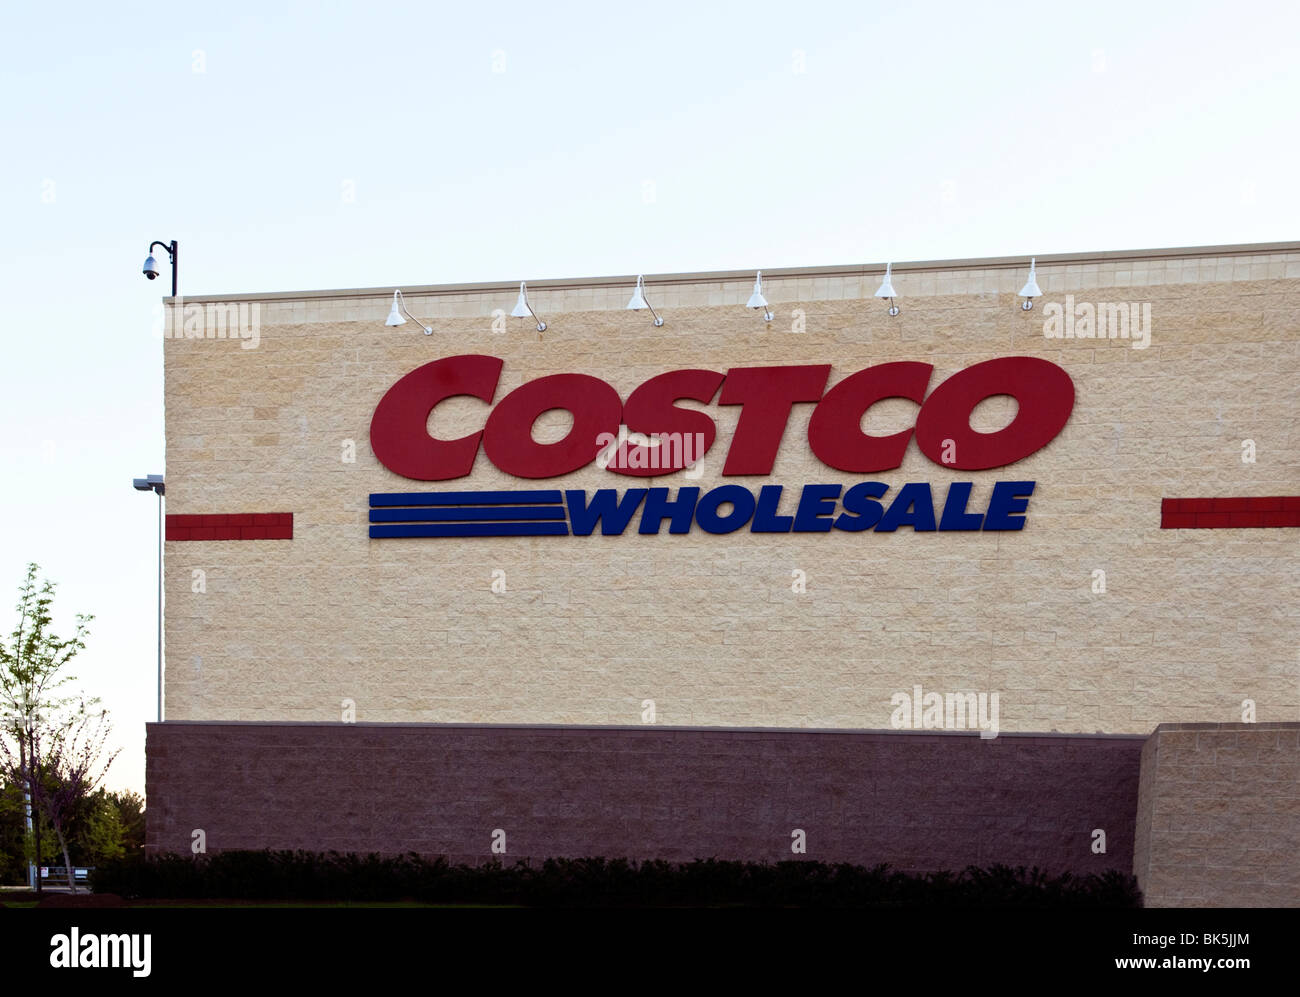 The Costco Wholesale Warehouse Building at Potomac Mills Mall Stock Photo